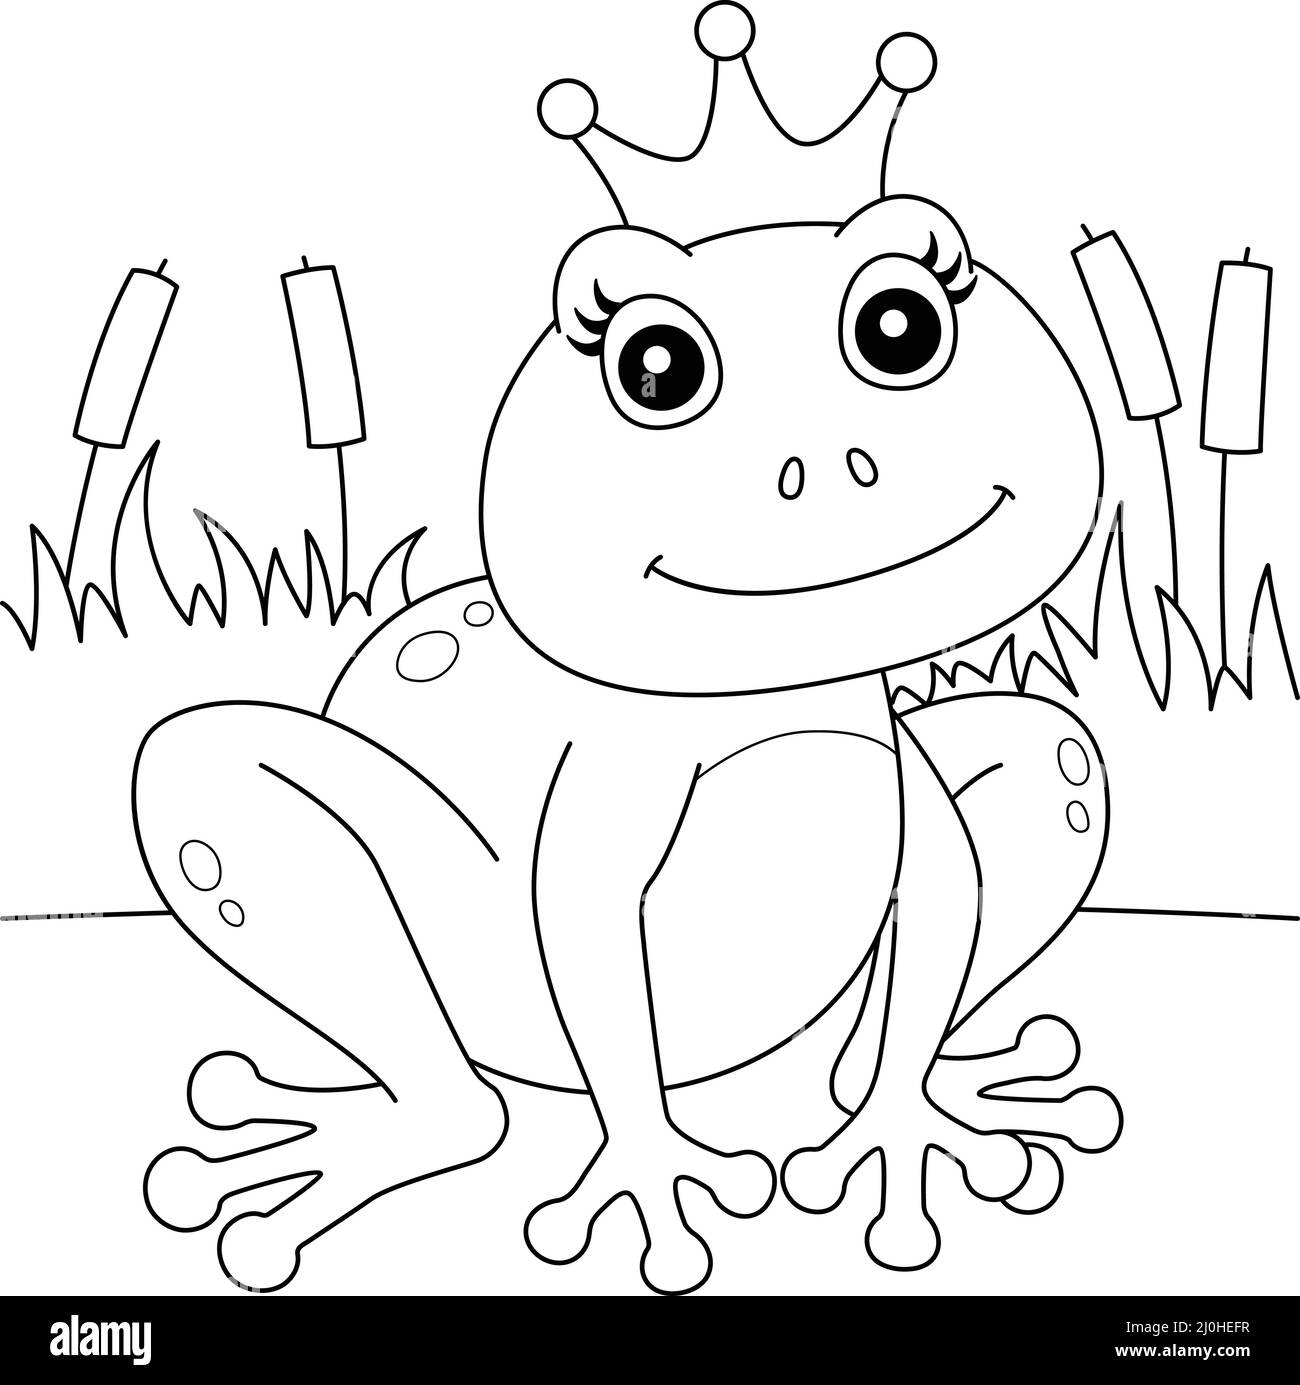 Frog With A Crown Coloring Page for Kids Stock Vector